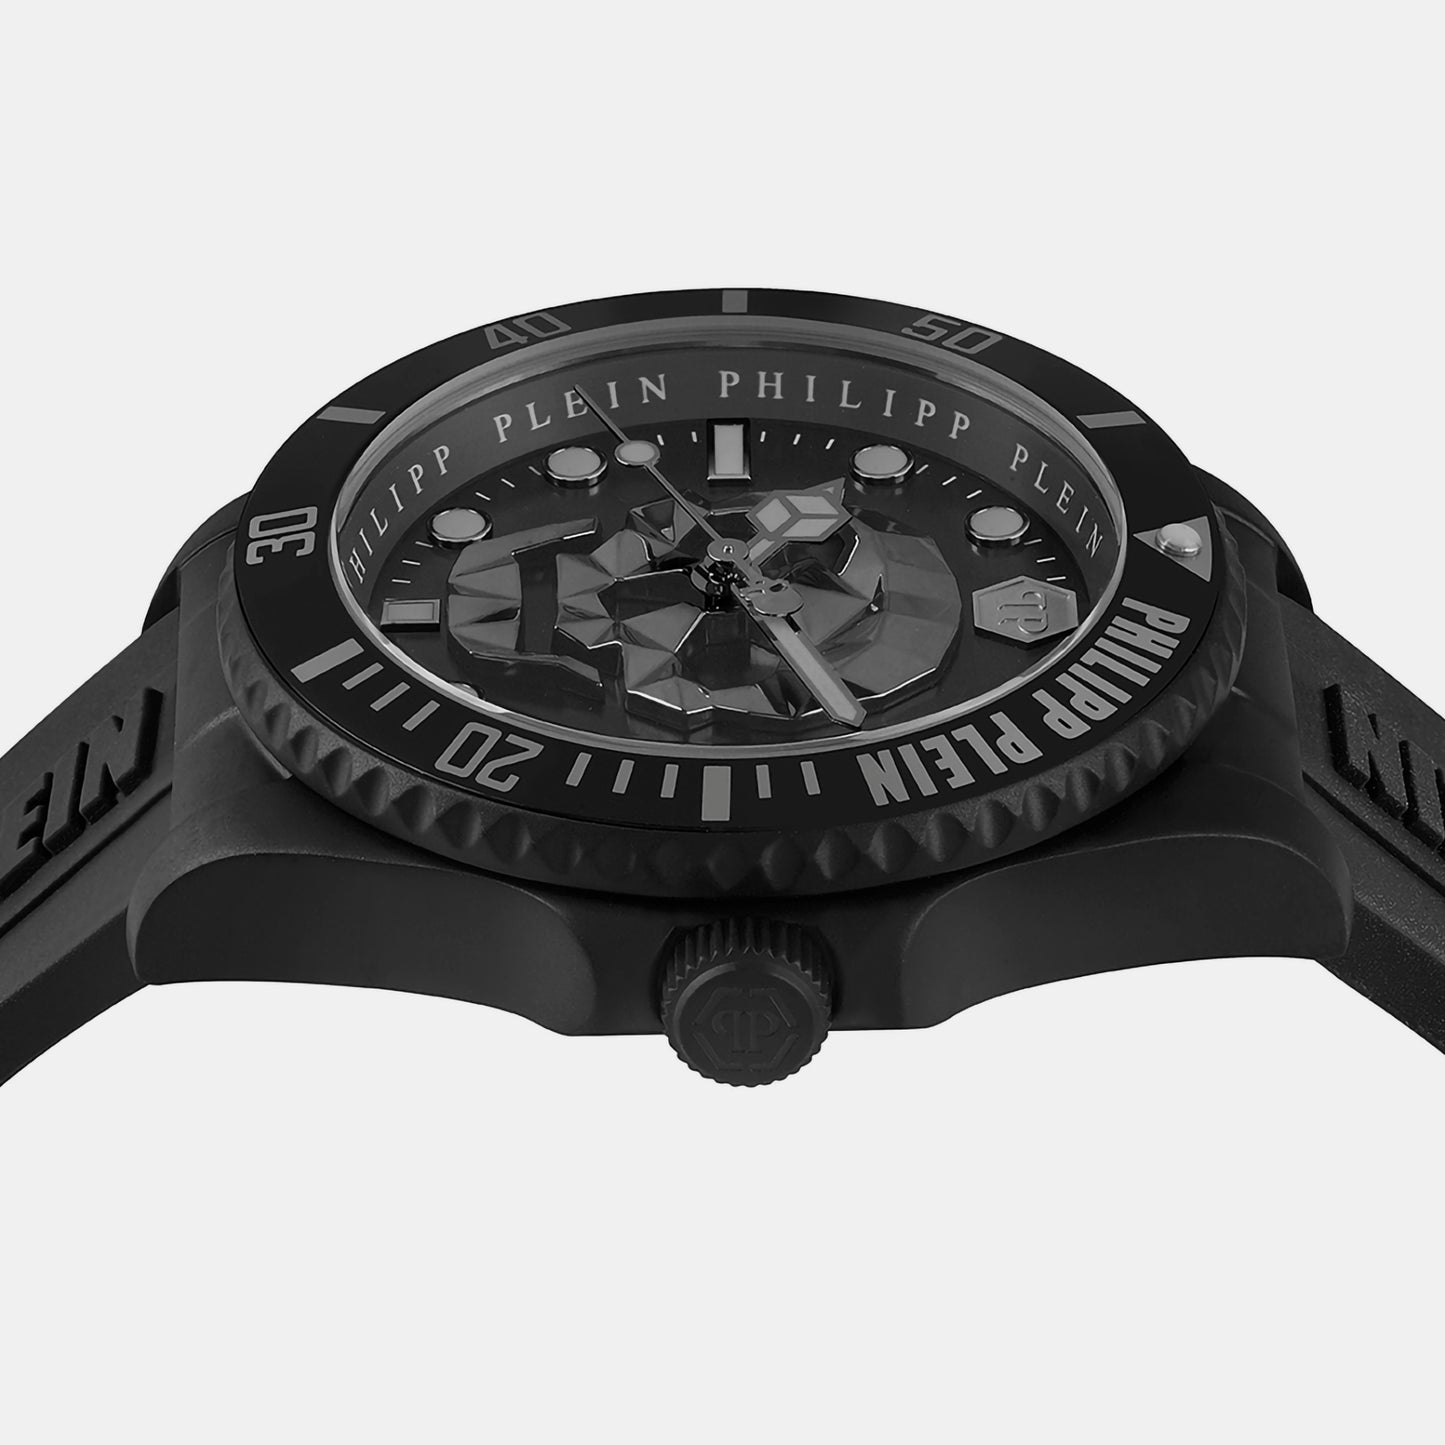 The $Kull Diver Male Black Analog Silicon Watch PWOAA0422